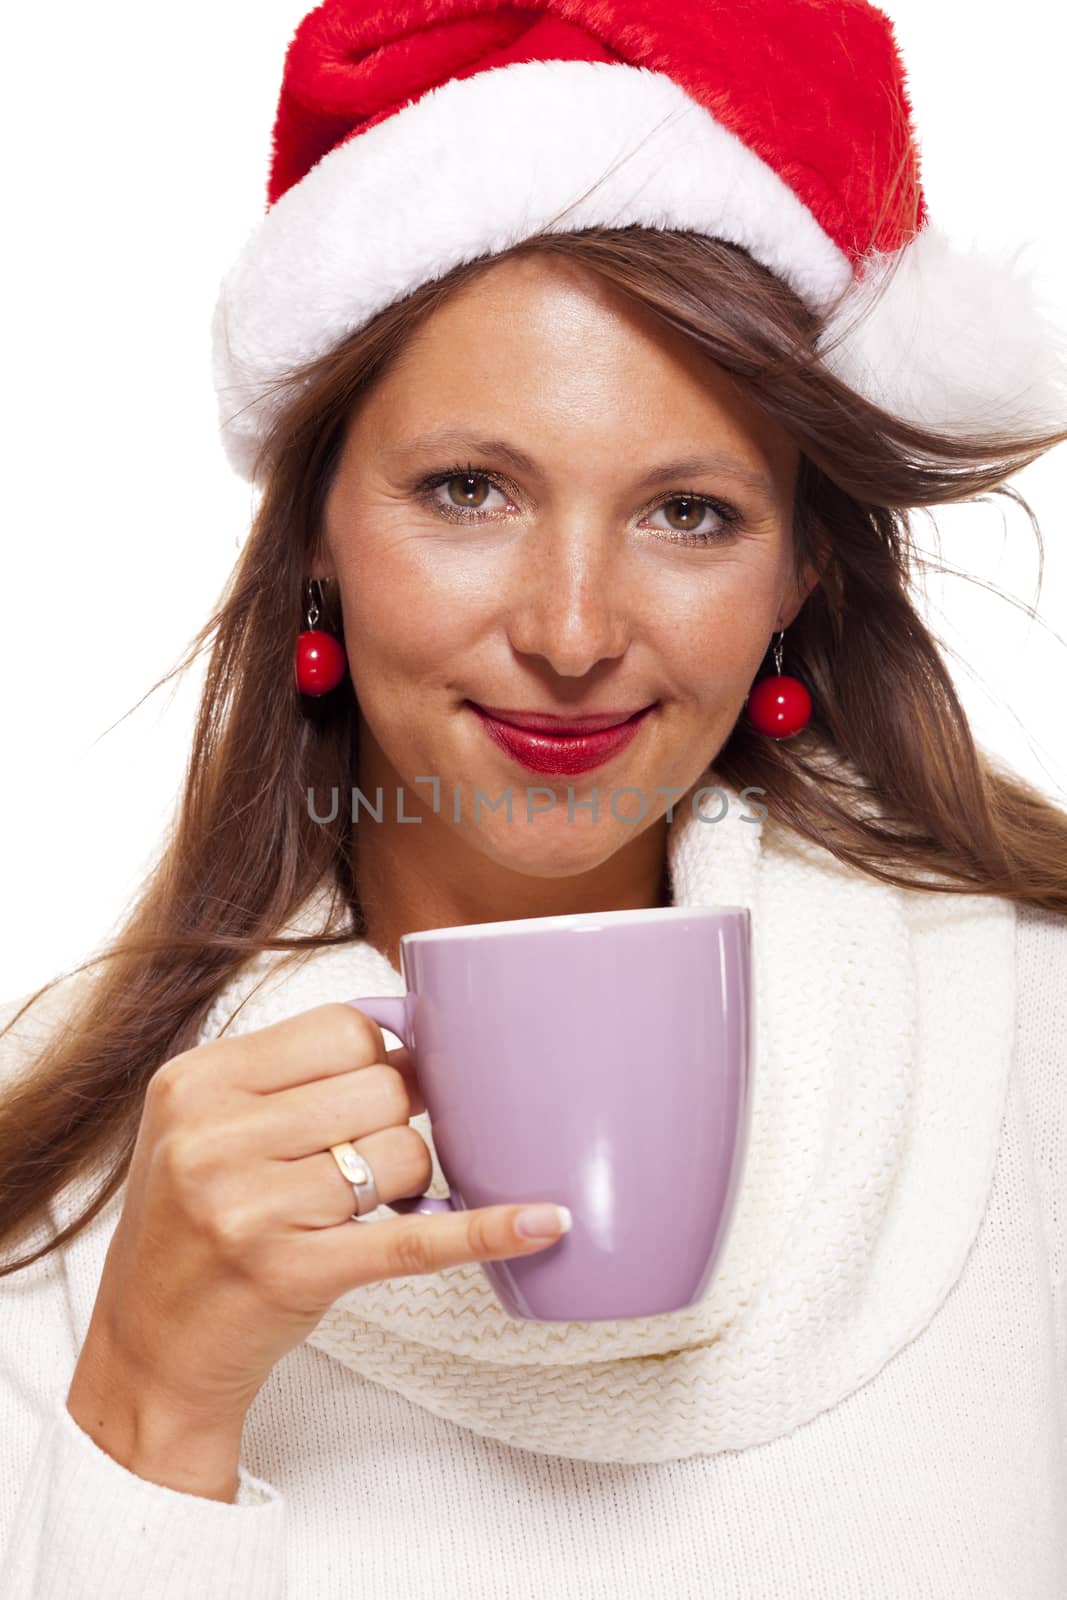 Cold young woman in a Santa hat sipping coffee tea by juniart